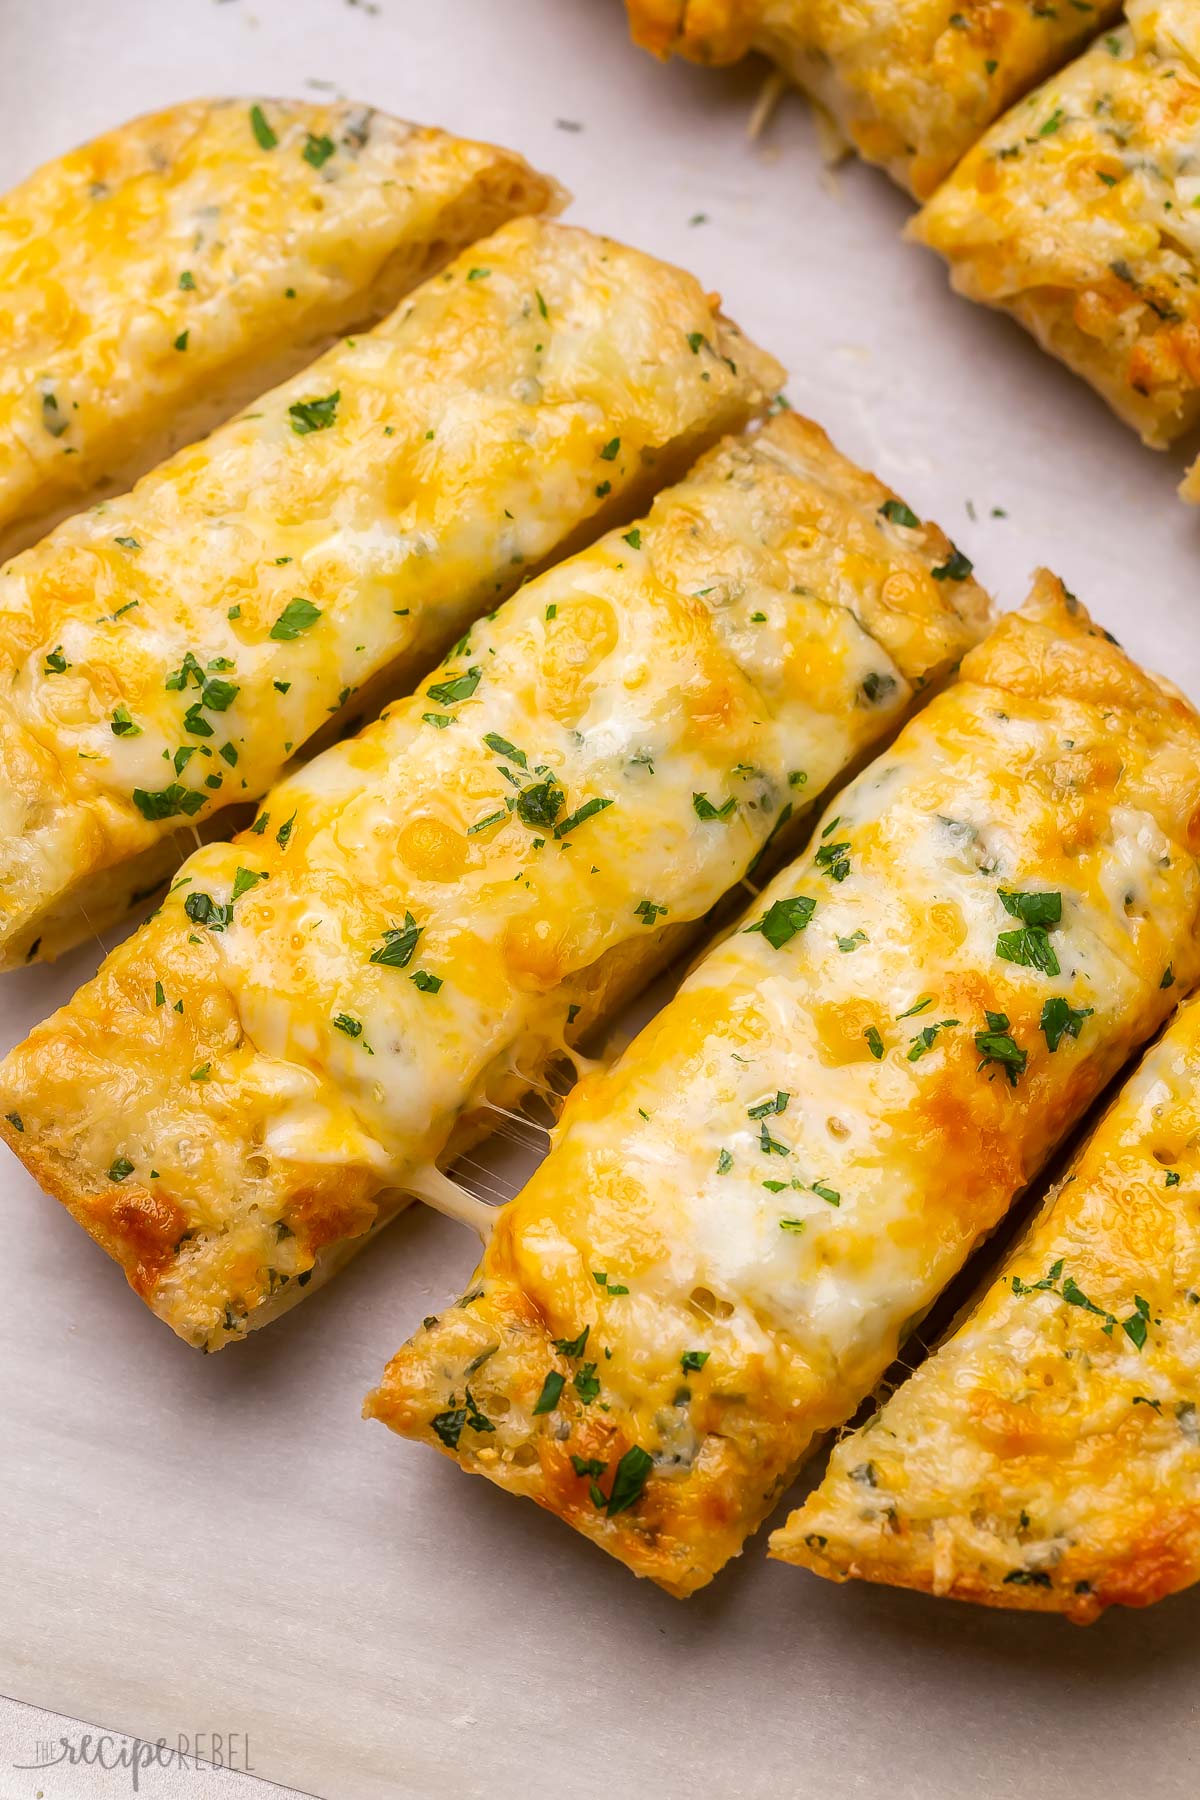 Top view of sliced cheesy garlic bread on a tray with chopped parsley sprinkled on top.